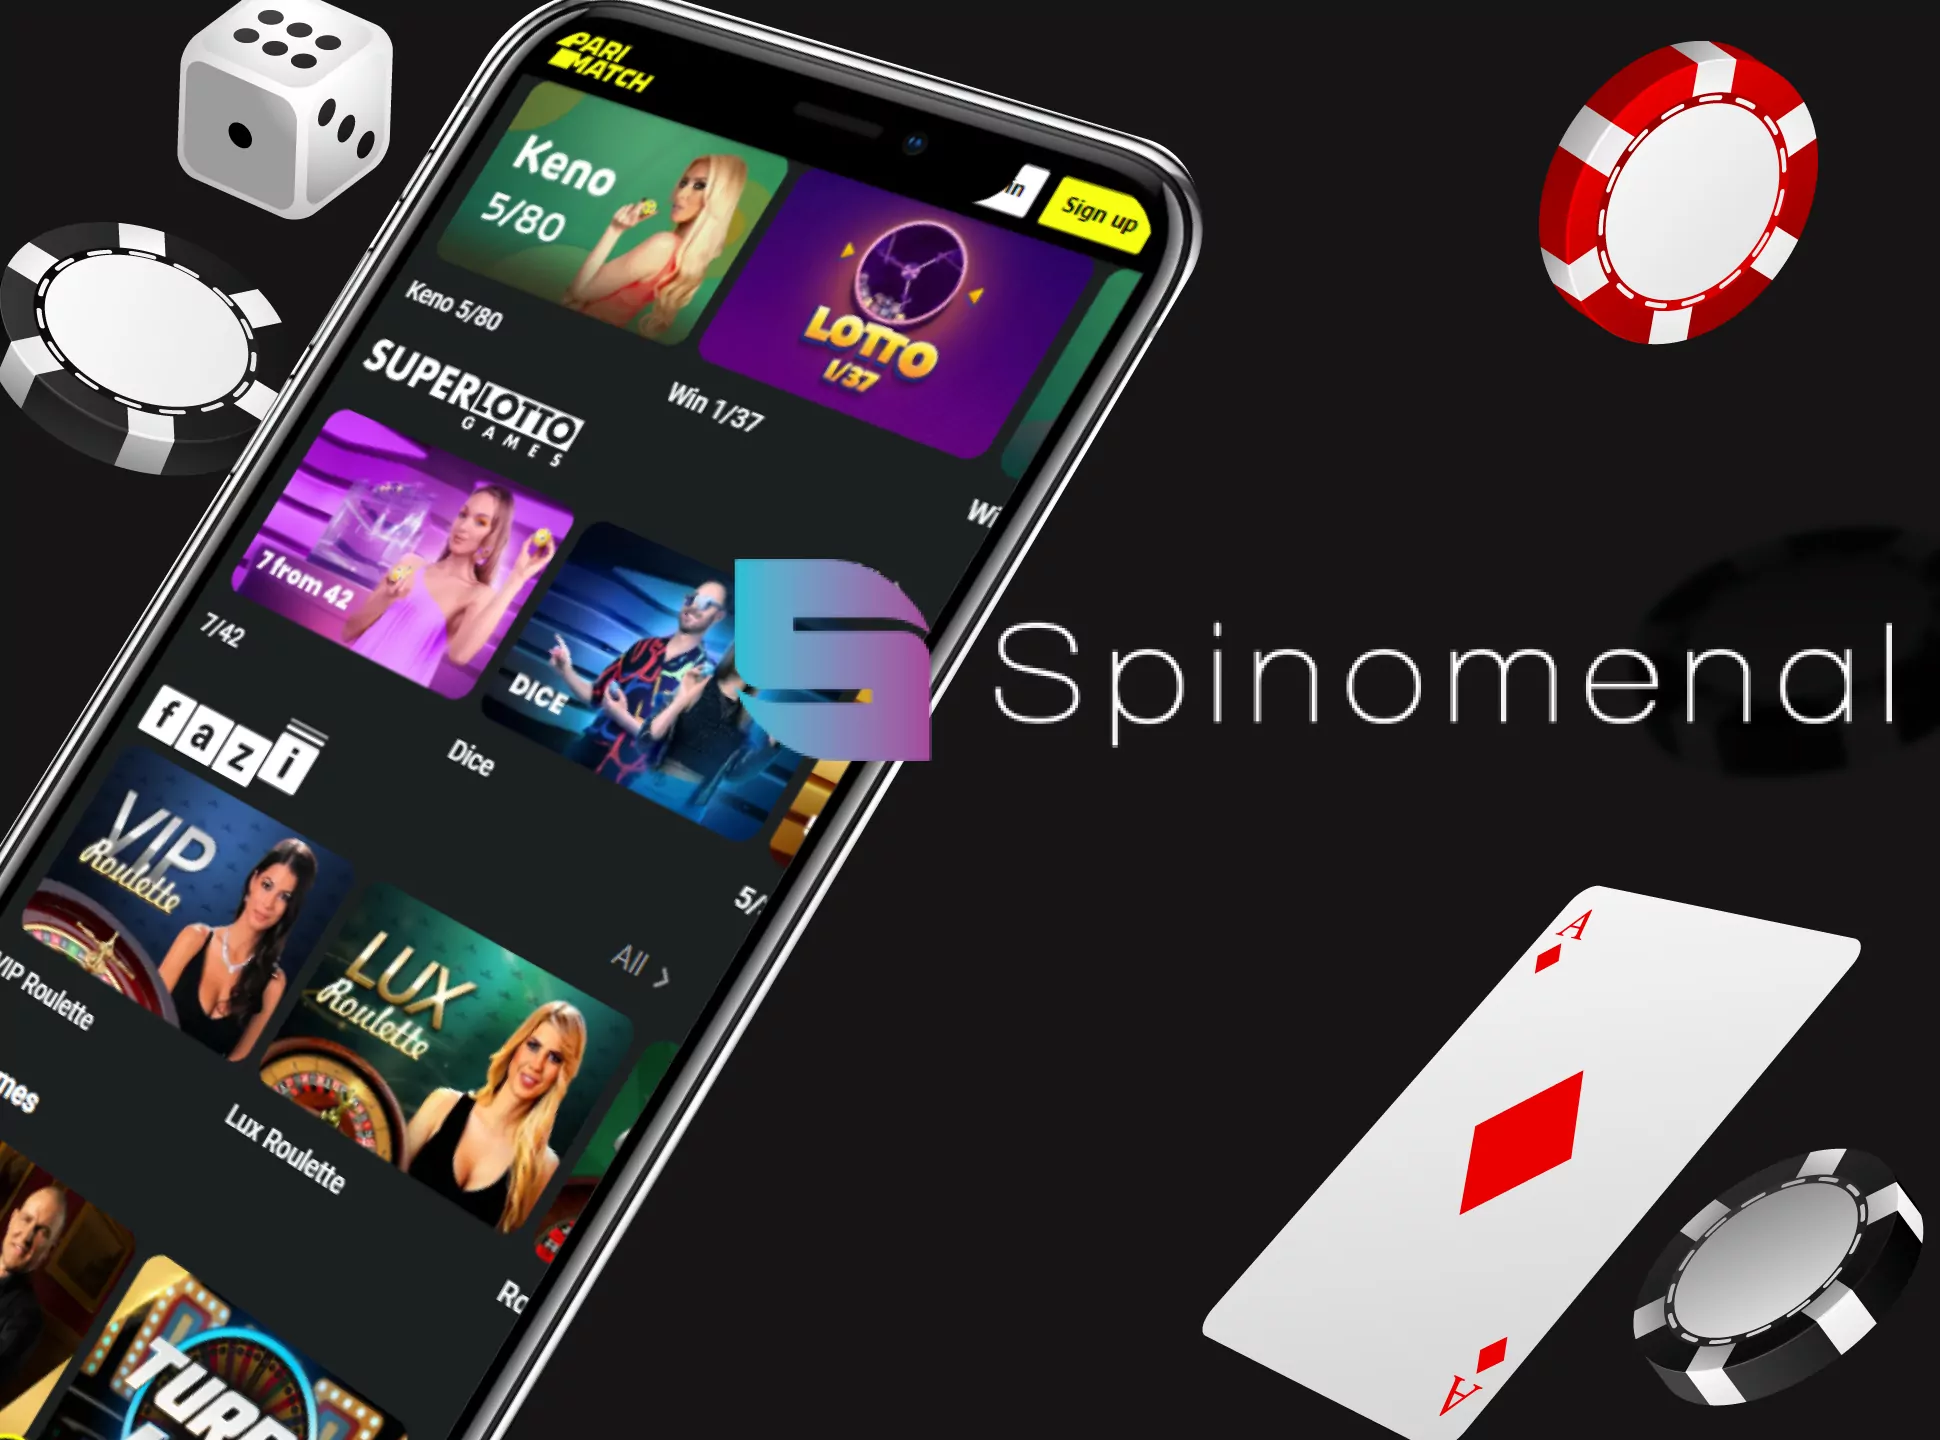 Parimatch has a lot of games from the Spinomenal provider.